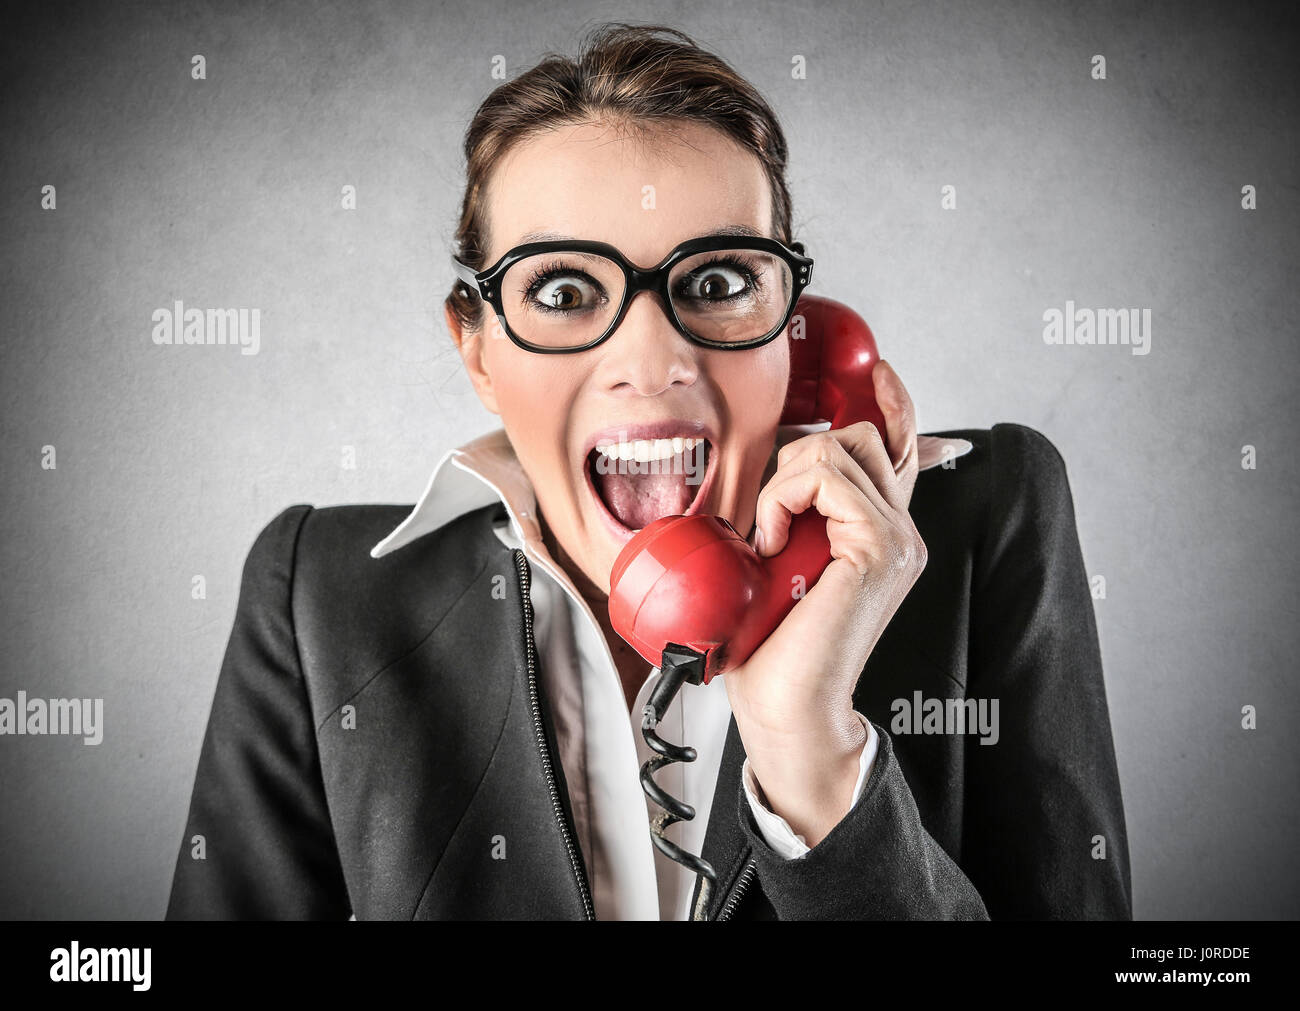 Excited businesswoman making a call with retro phone Stock Photo